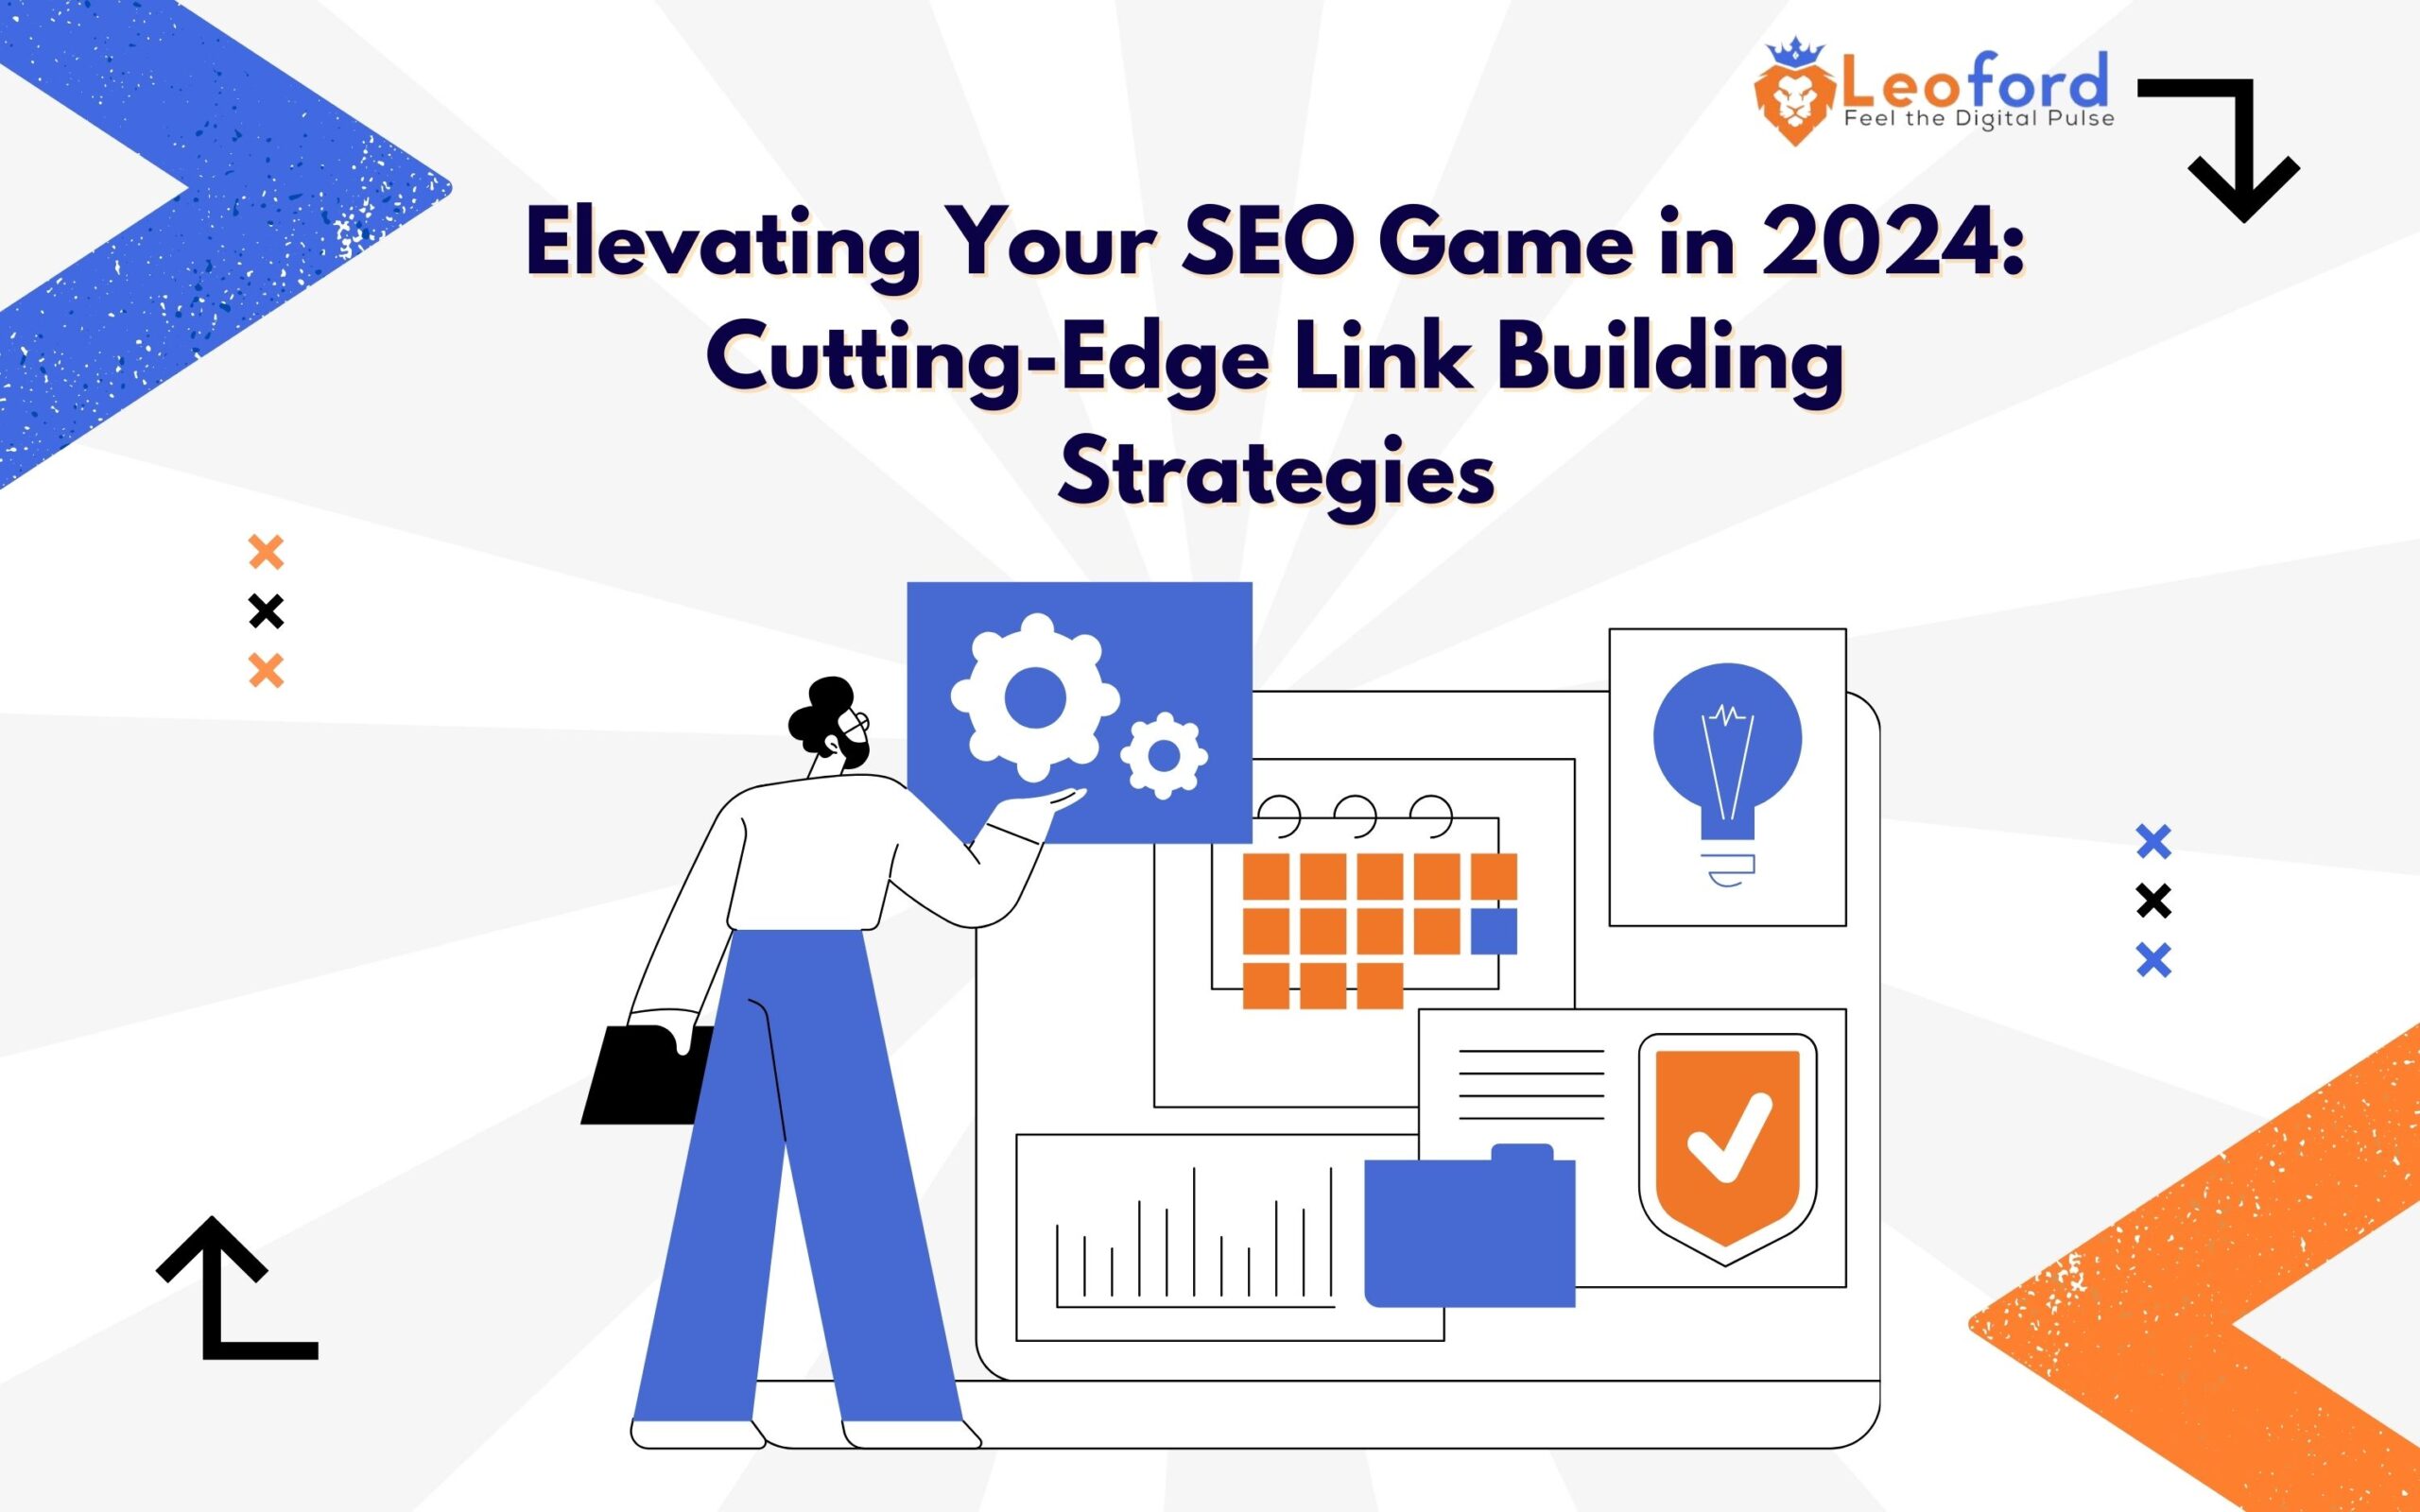 Elevating Your SEO Game in 2024: Cutting-Edge Link Building Strategies